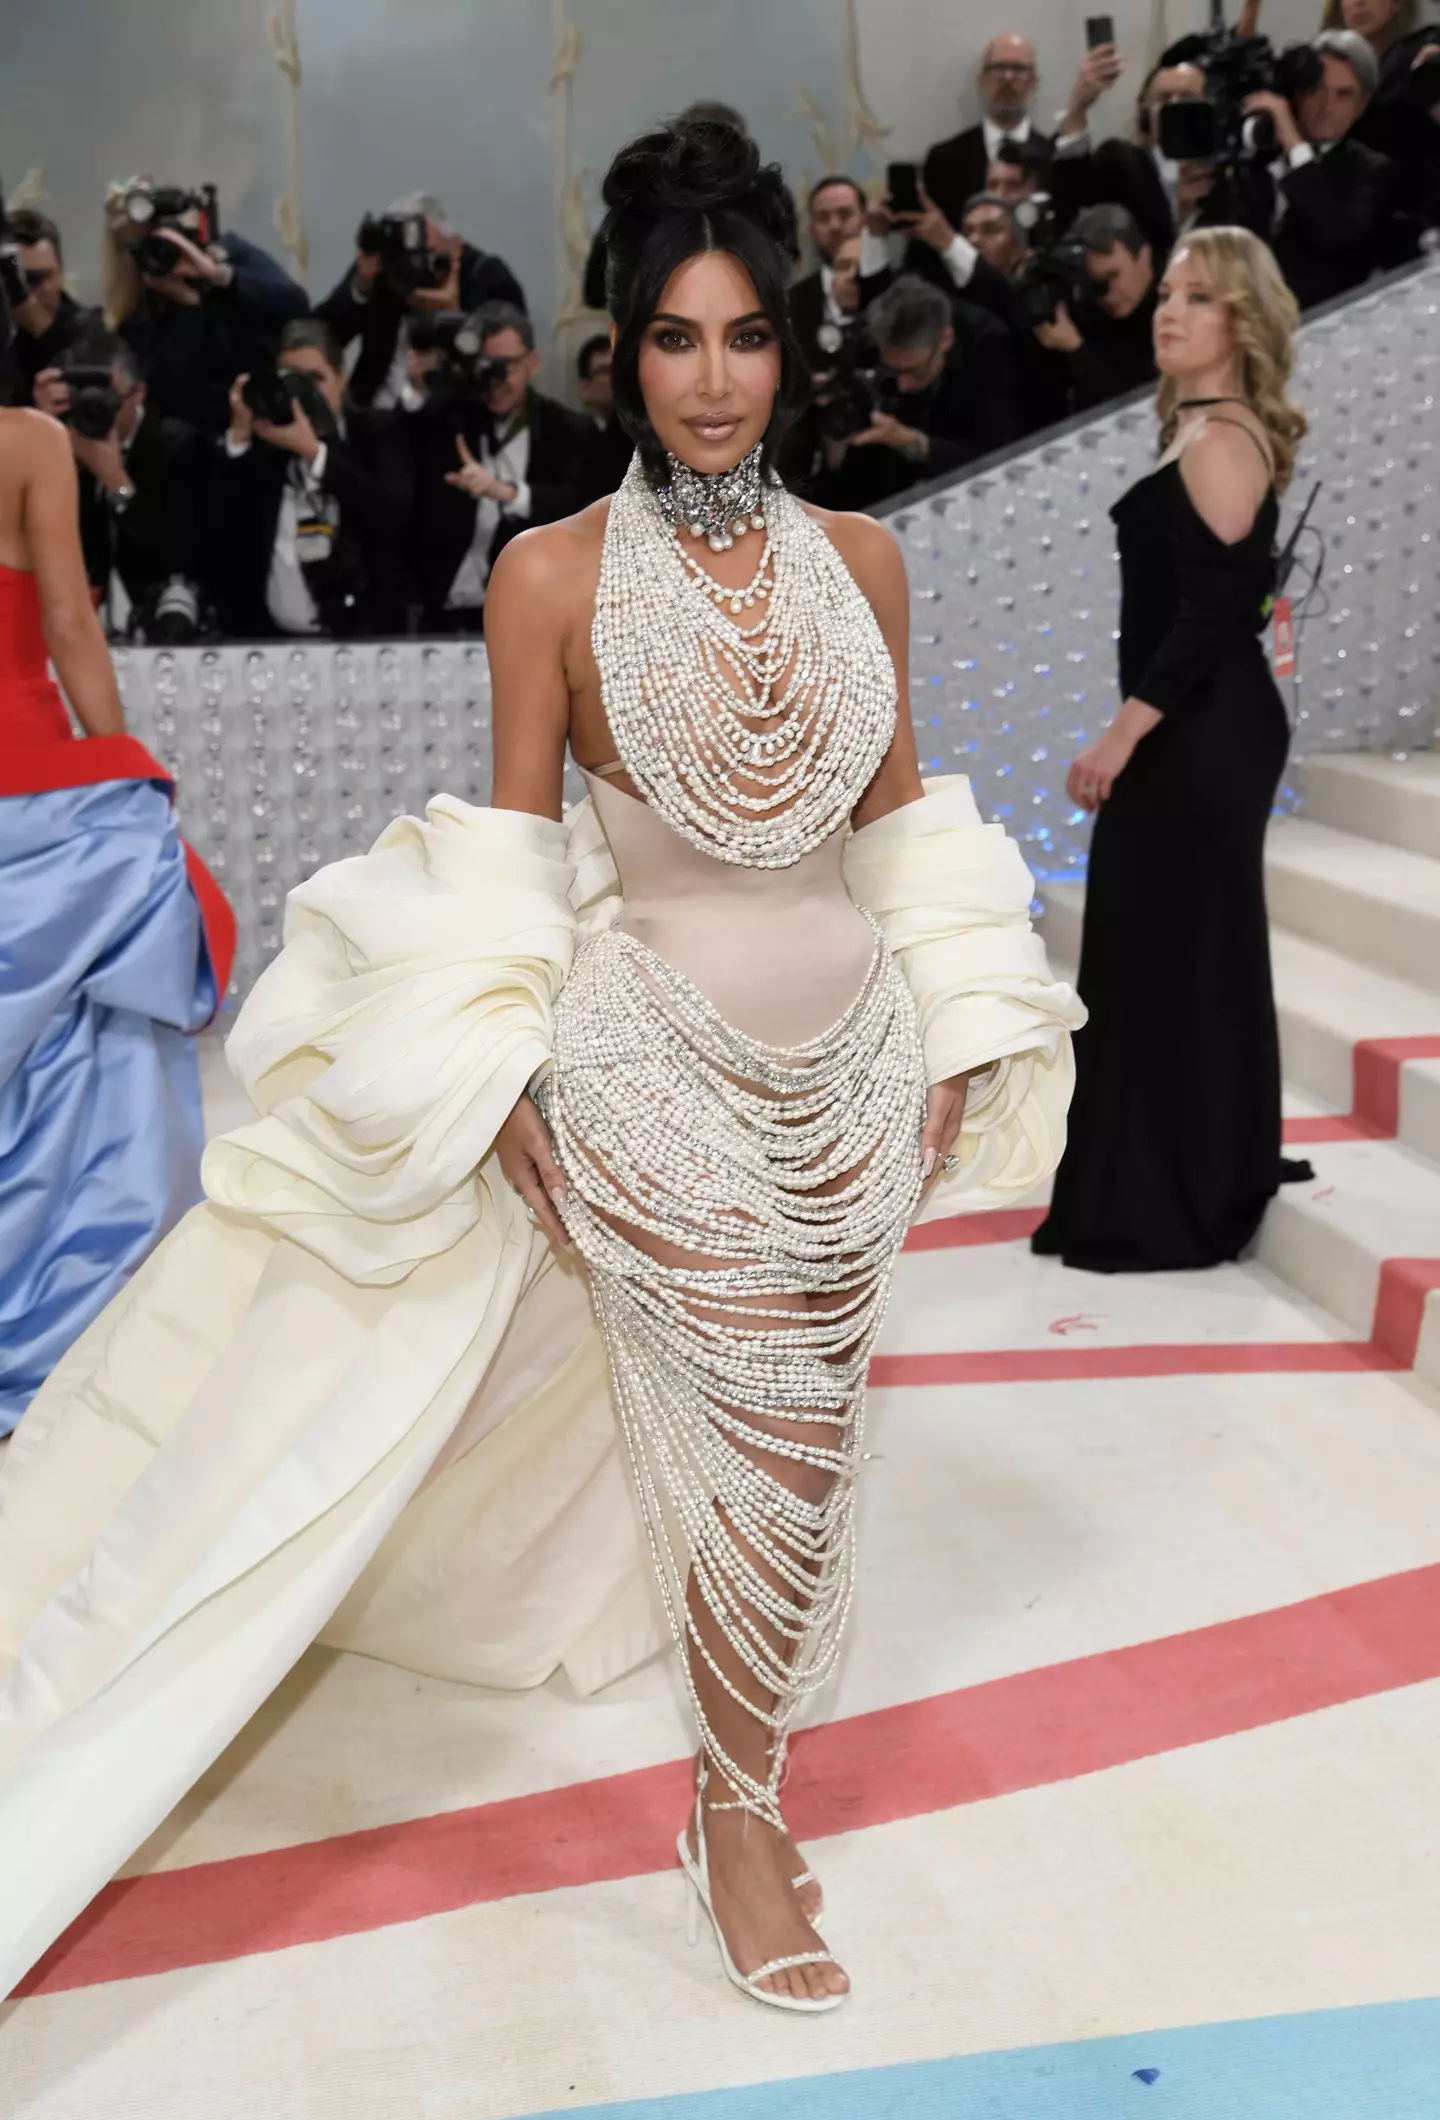 Kim Kardashian stepped out onto the red (white and blue) carpet at 2023's Met Gala.